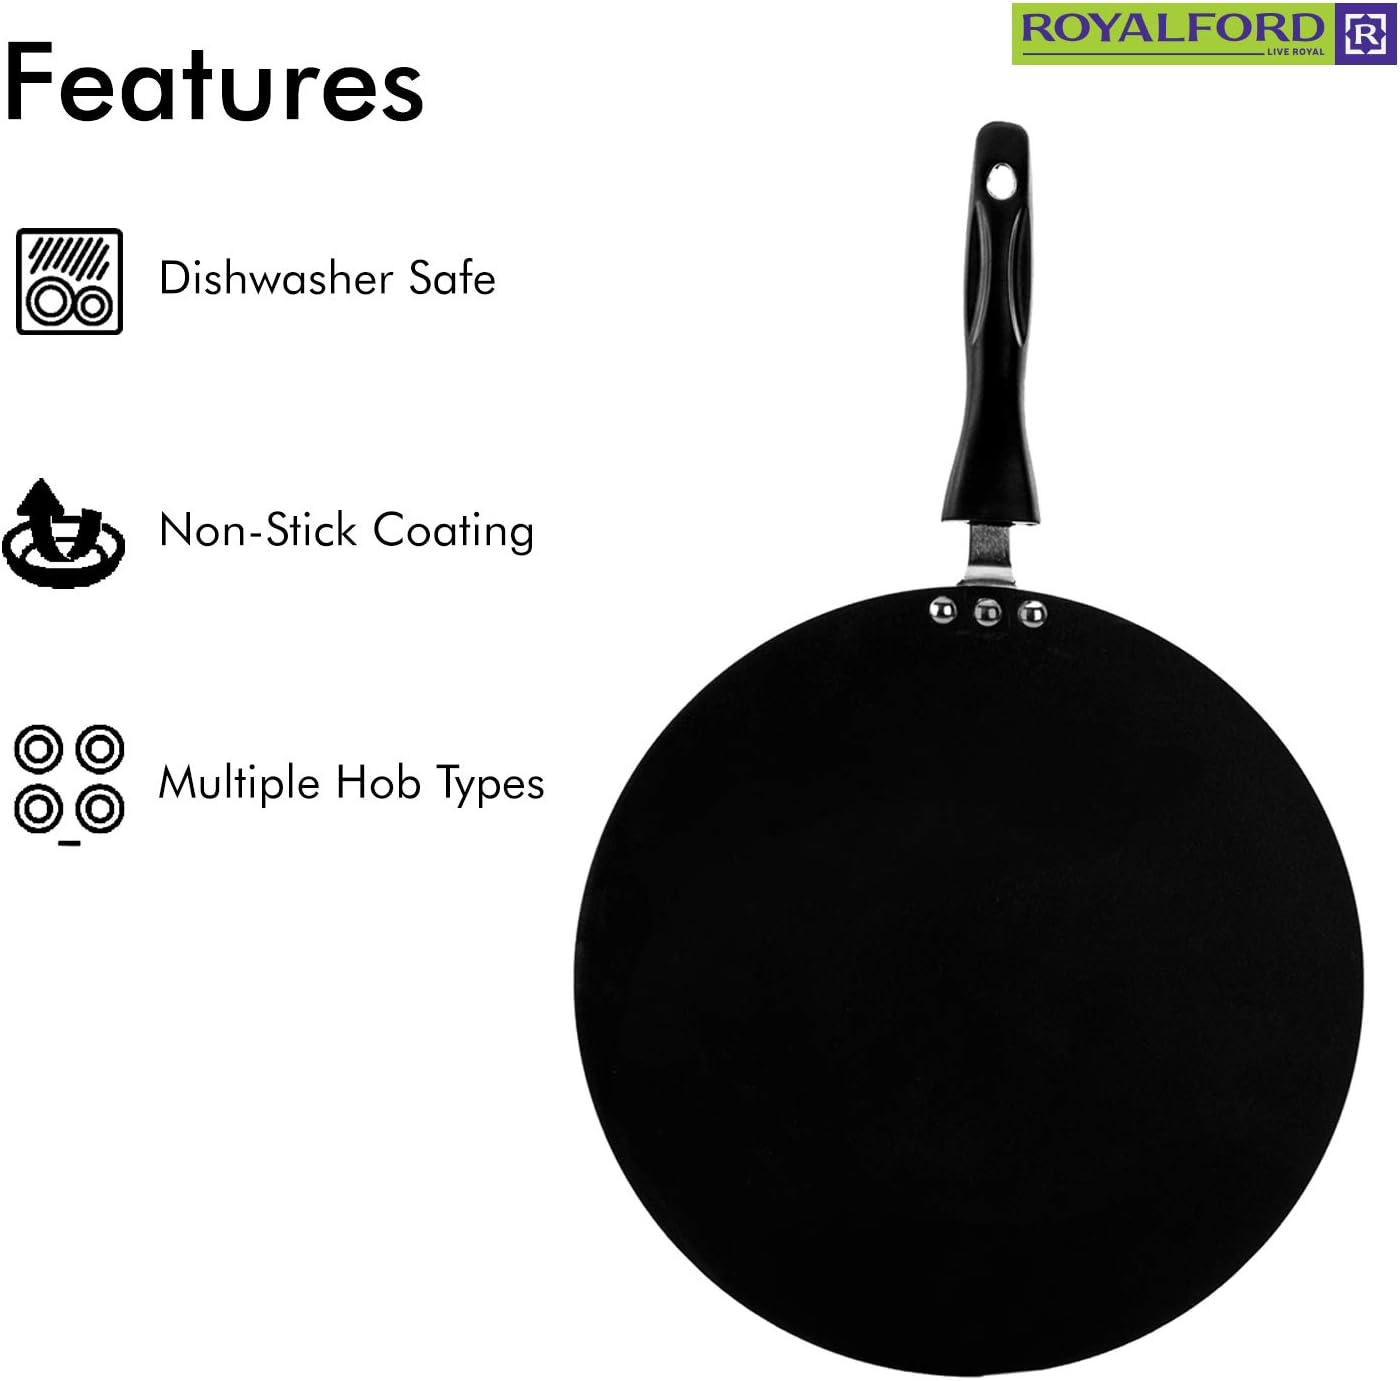 Royalford Rf2013-T30 30 cm Non Stick Tawa - Marble Coating Pan Suitable For Crepe Chapatti Pancakes Roti Dosa Flatbread Or Naan Bread - 3 Layer Non-Stick Surface | 1 Year Warranty, Black